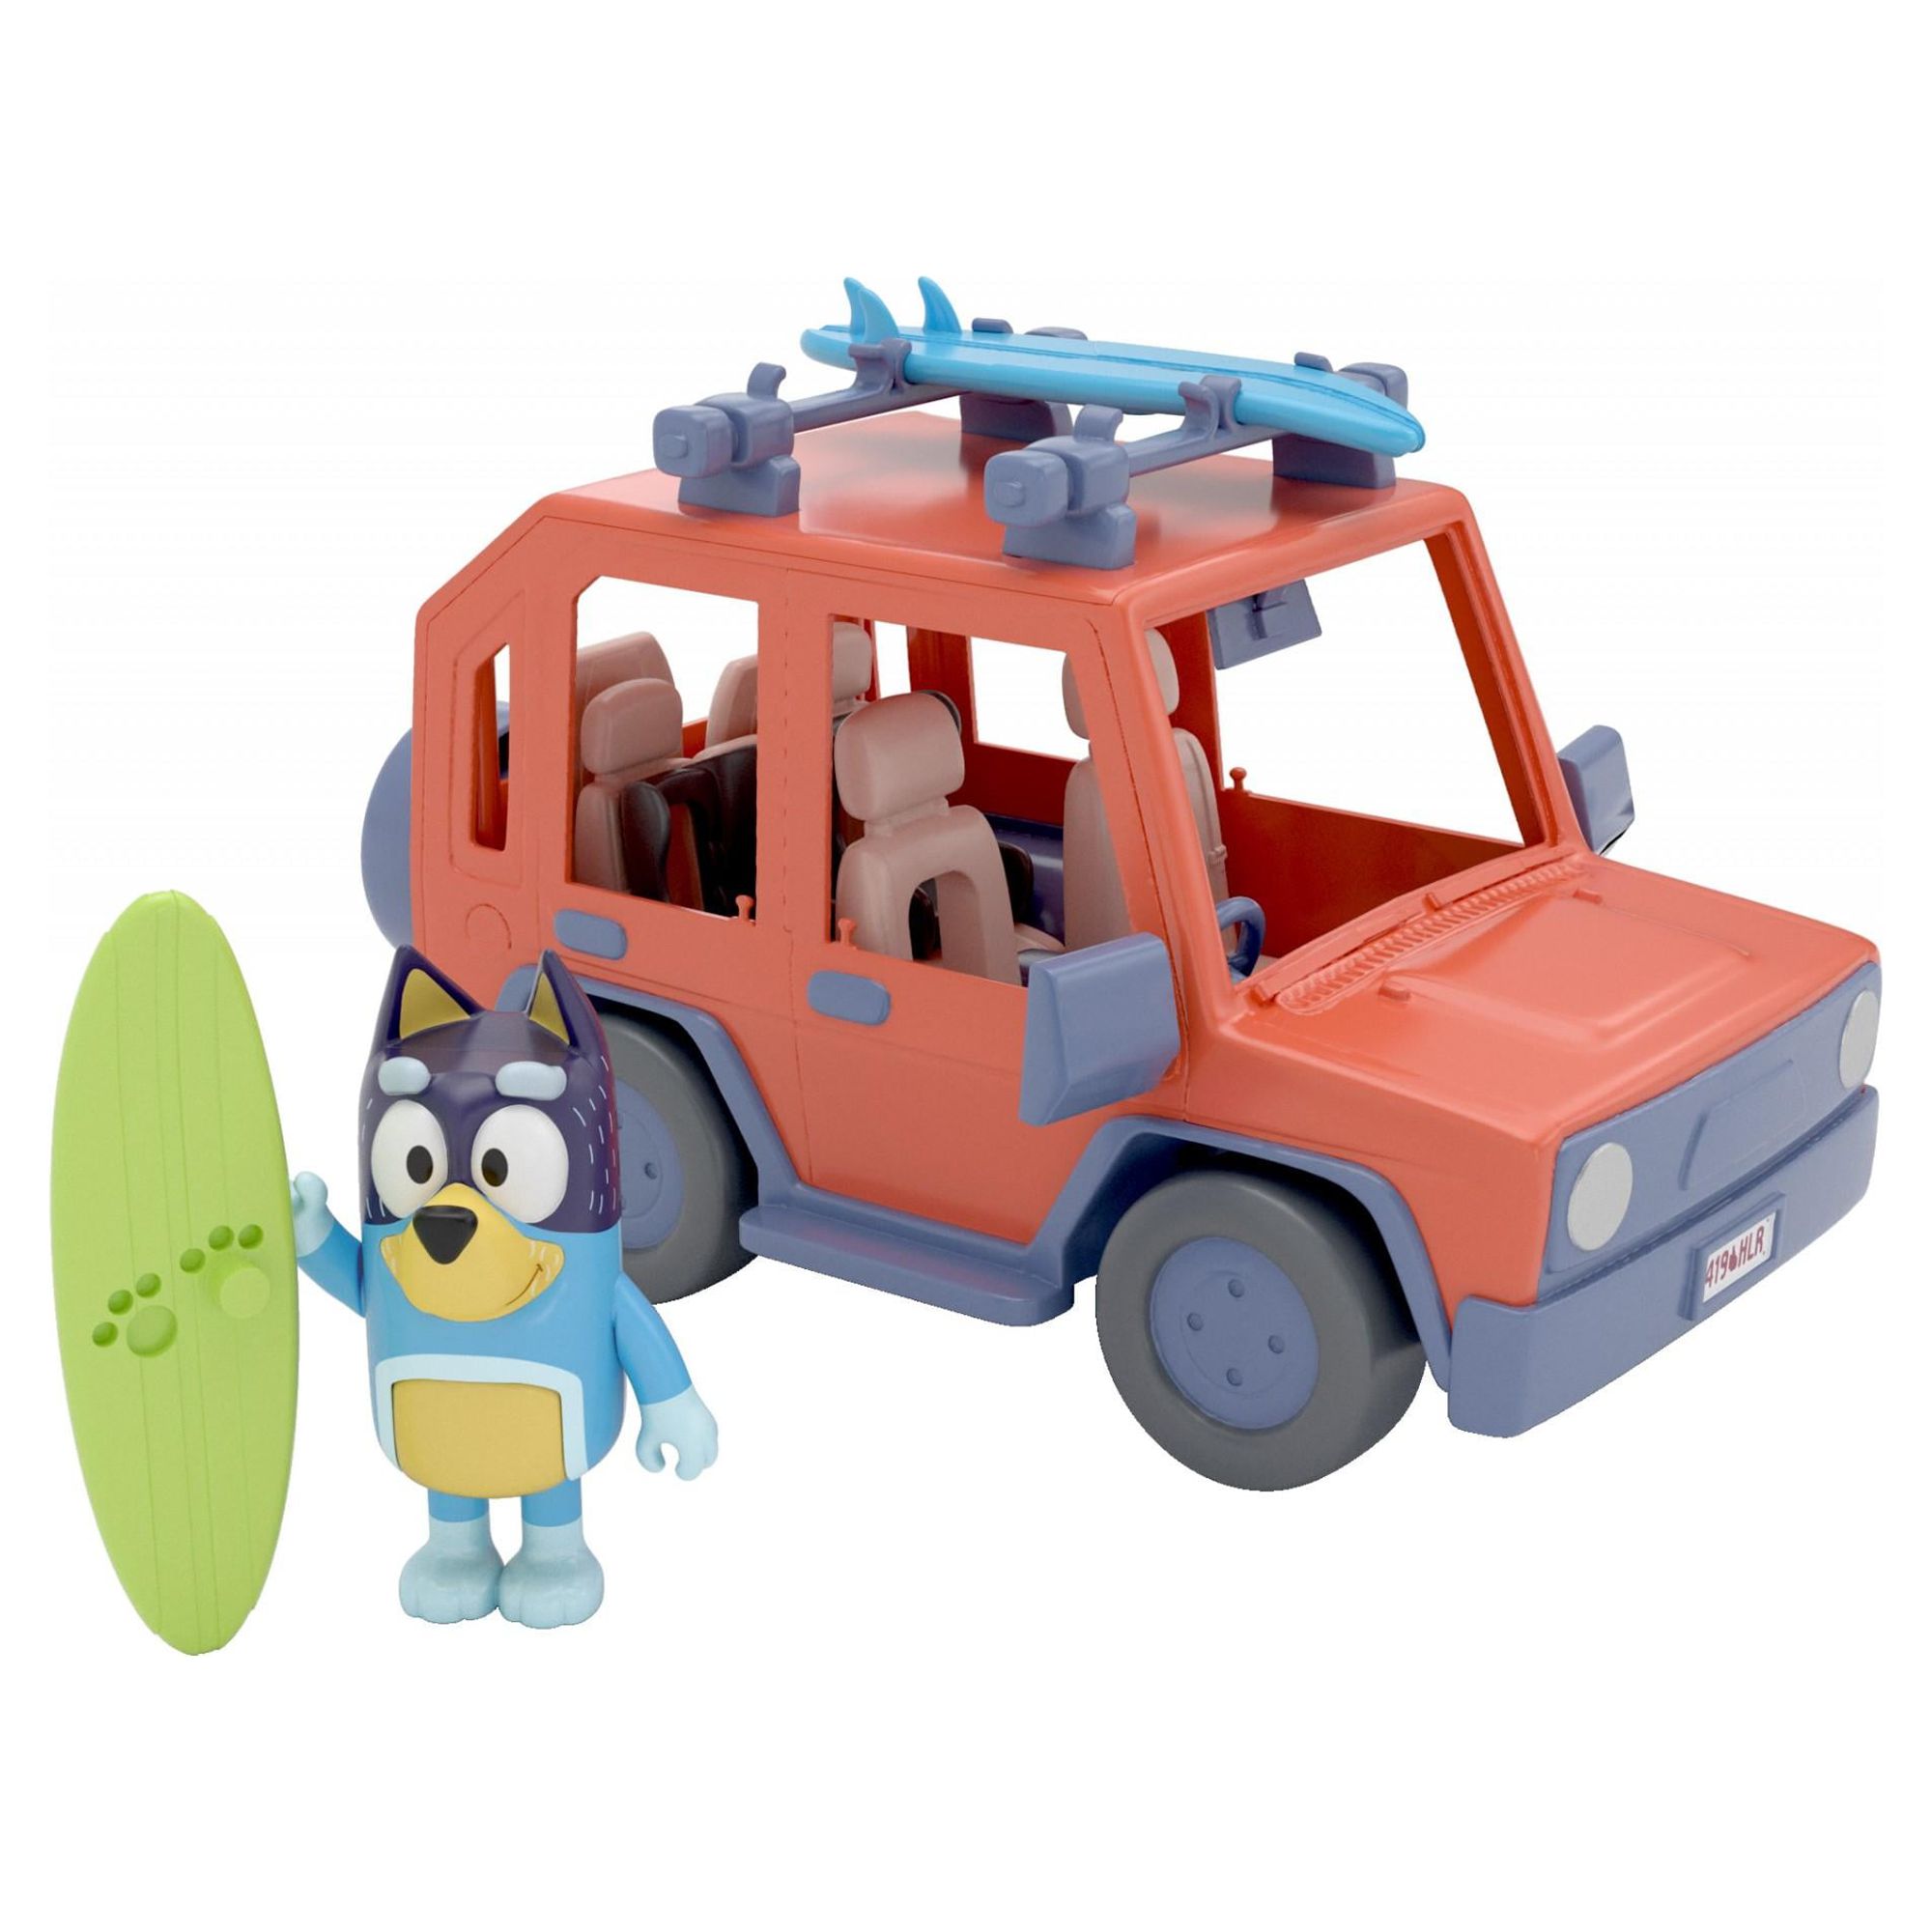 Bluey, 4-Wheel-Drive Family Vehicle, with 1 Figure and 2 Surfboards, Toddler Toy - image 1 of 13